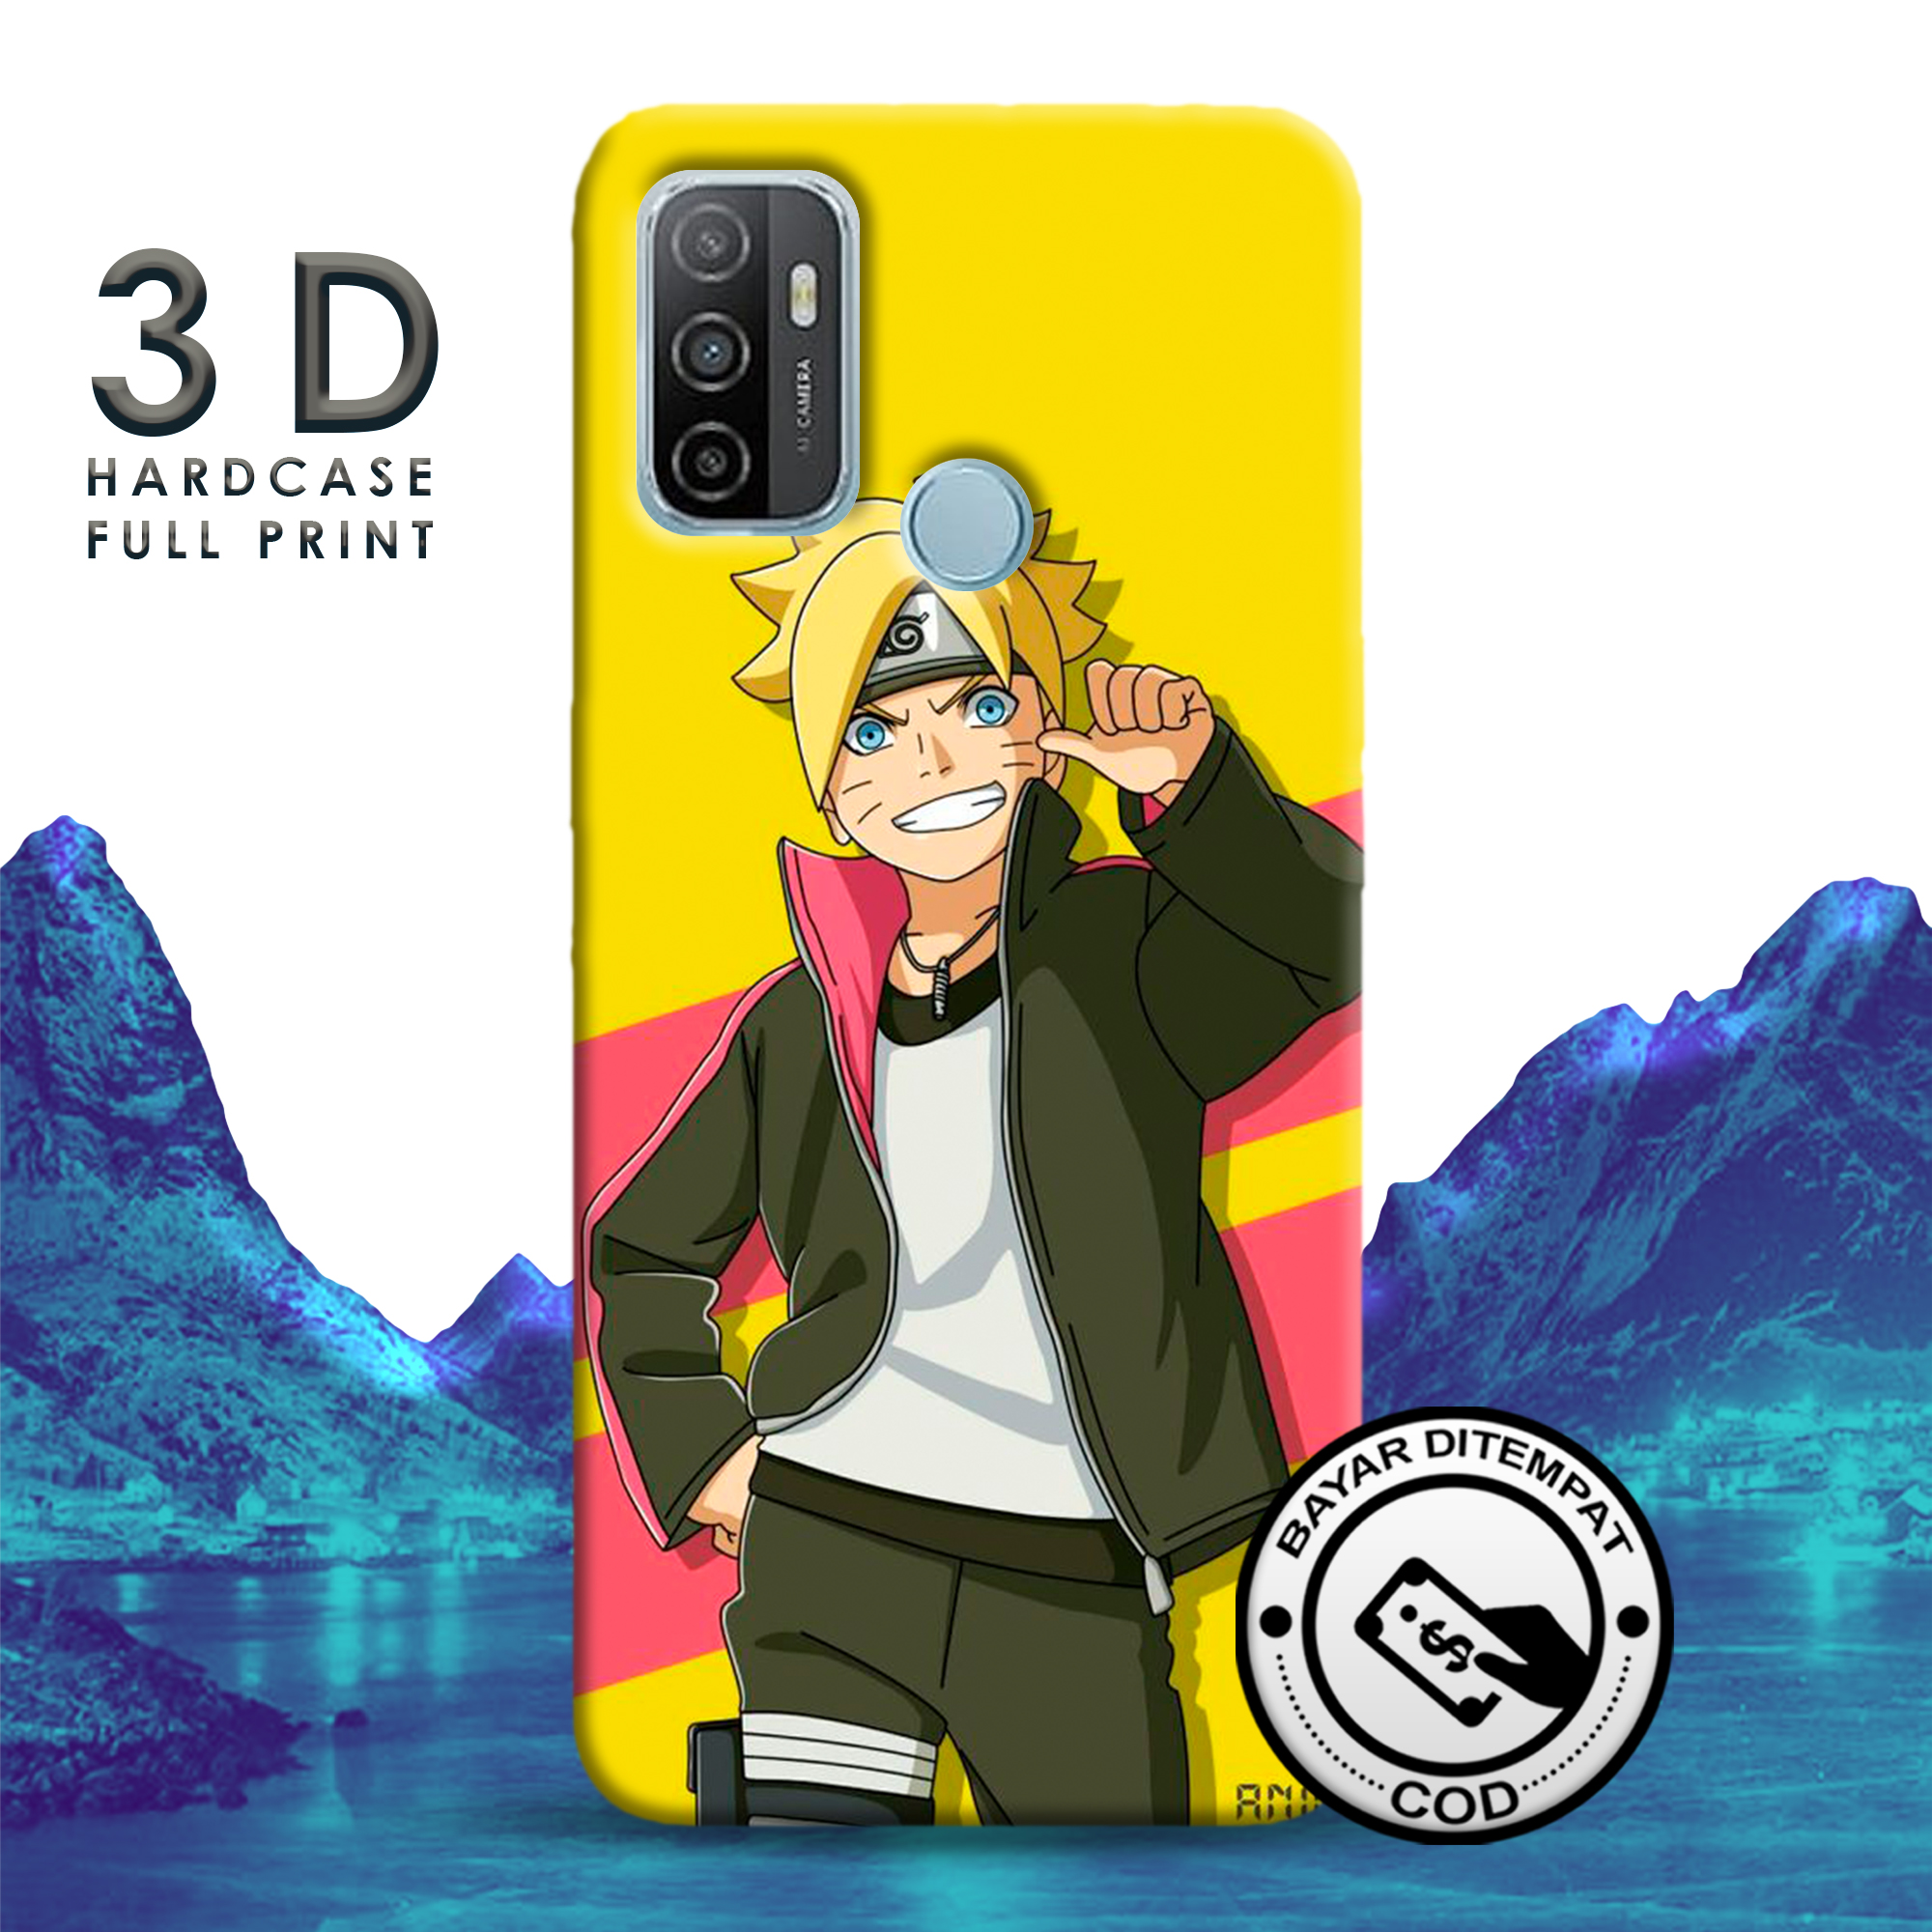 Rou Case Hard Oppo A53 A33 2020 Case Design Cartoon Boruto 3d Cool Case Pay In Place Shopee Philippines